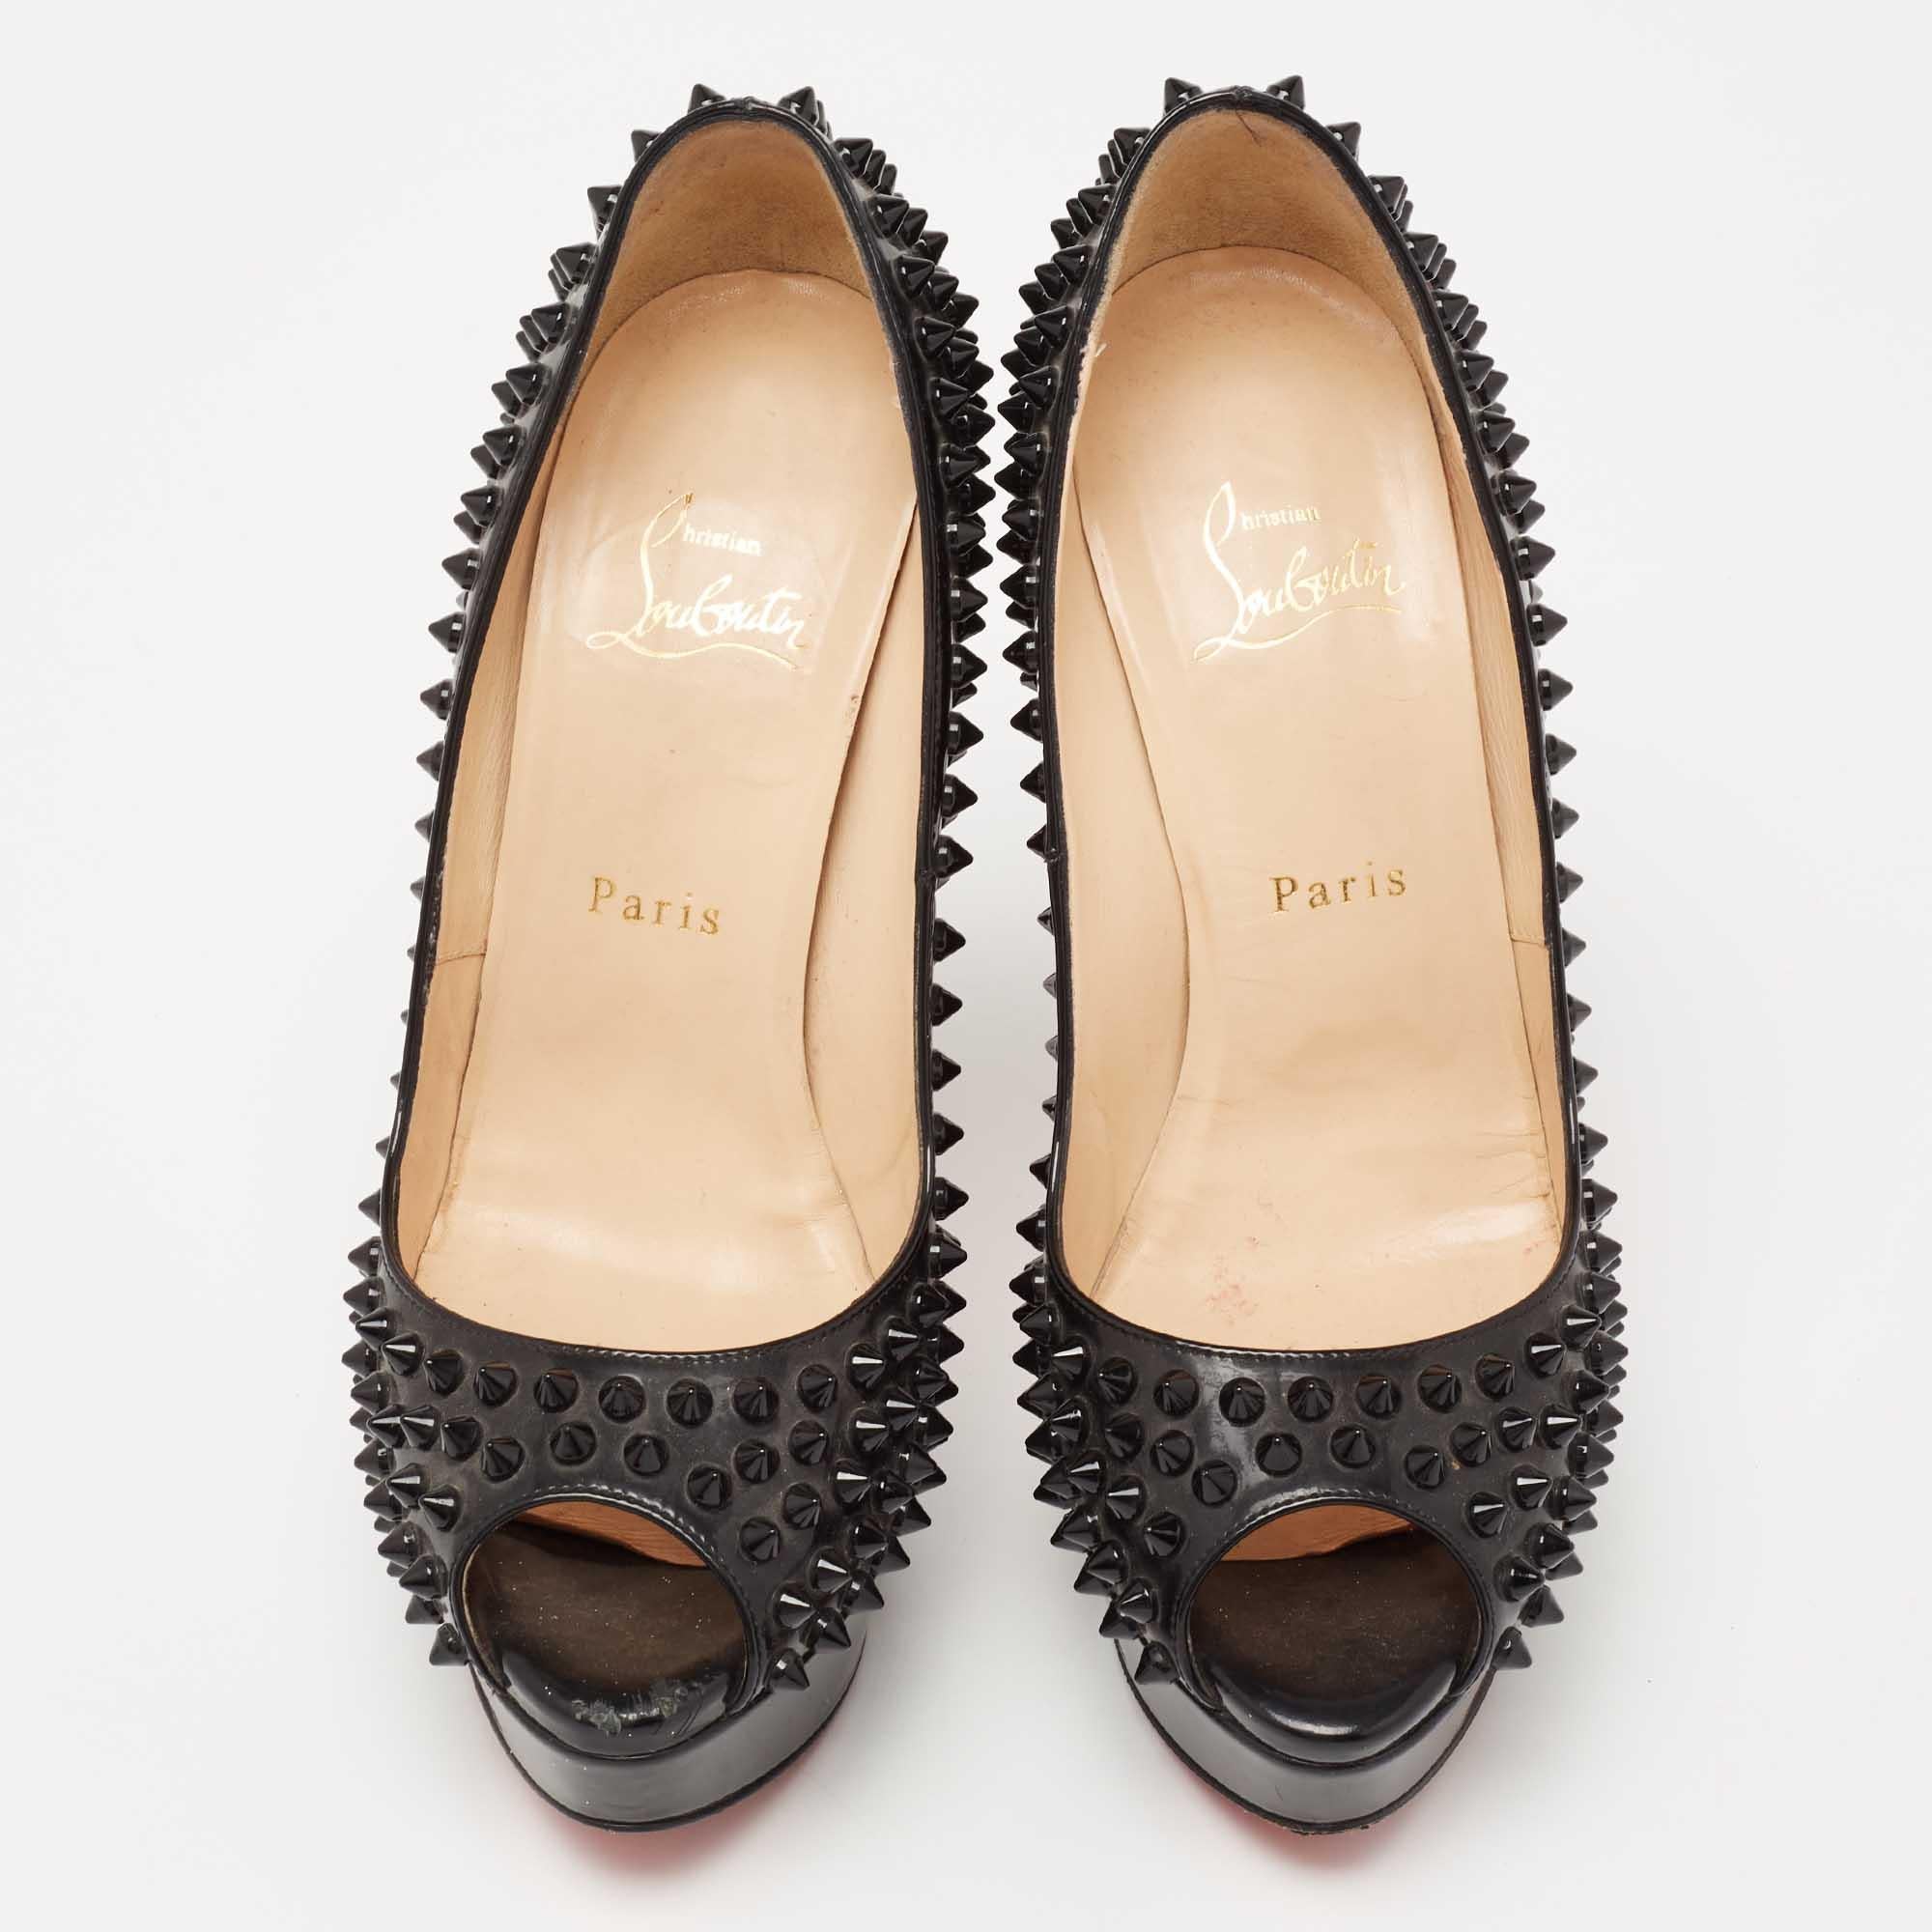 Stand out from the crowd with this gorgeous pair of Louboutins that exude high fashion with class! Crafted from patent leather, this is a creation from their Lady Peep collection. They feature a classic black shade with peep toes and tonal spikes